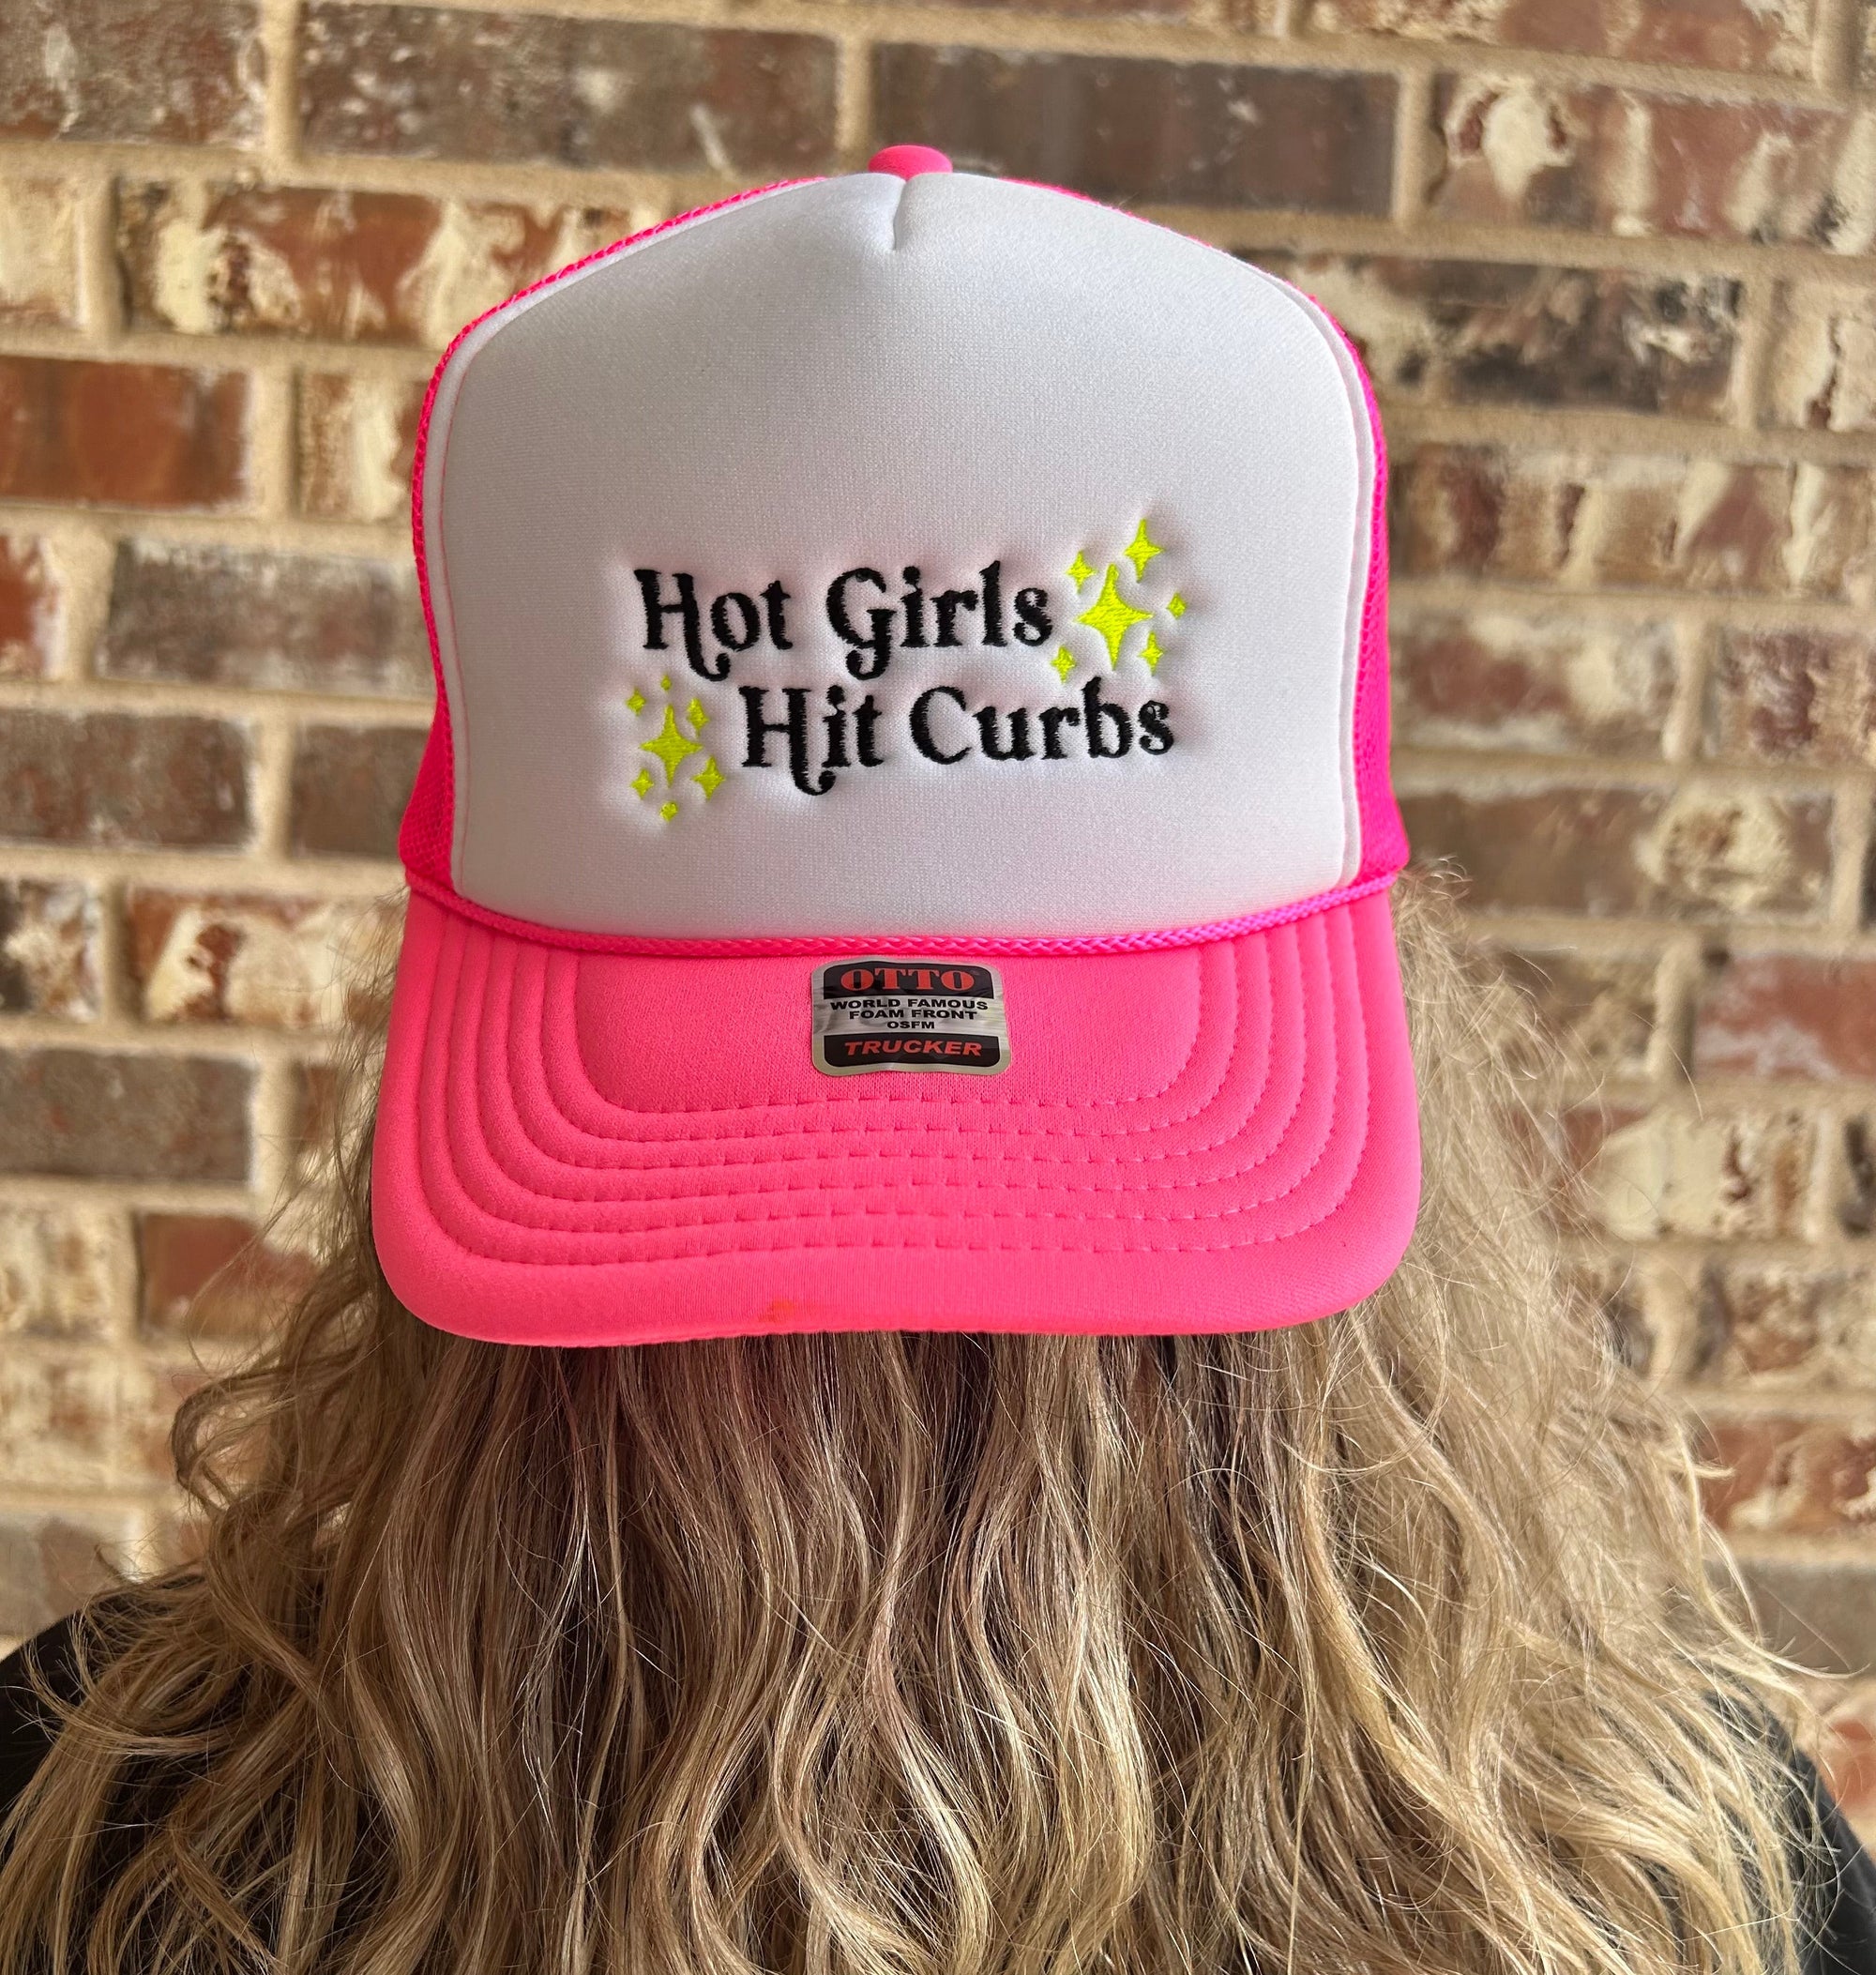 Hot Girls Hit Curbs Embroidered Trucker Hat